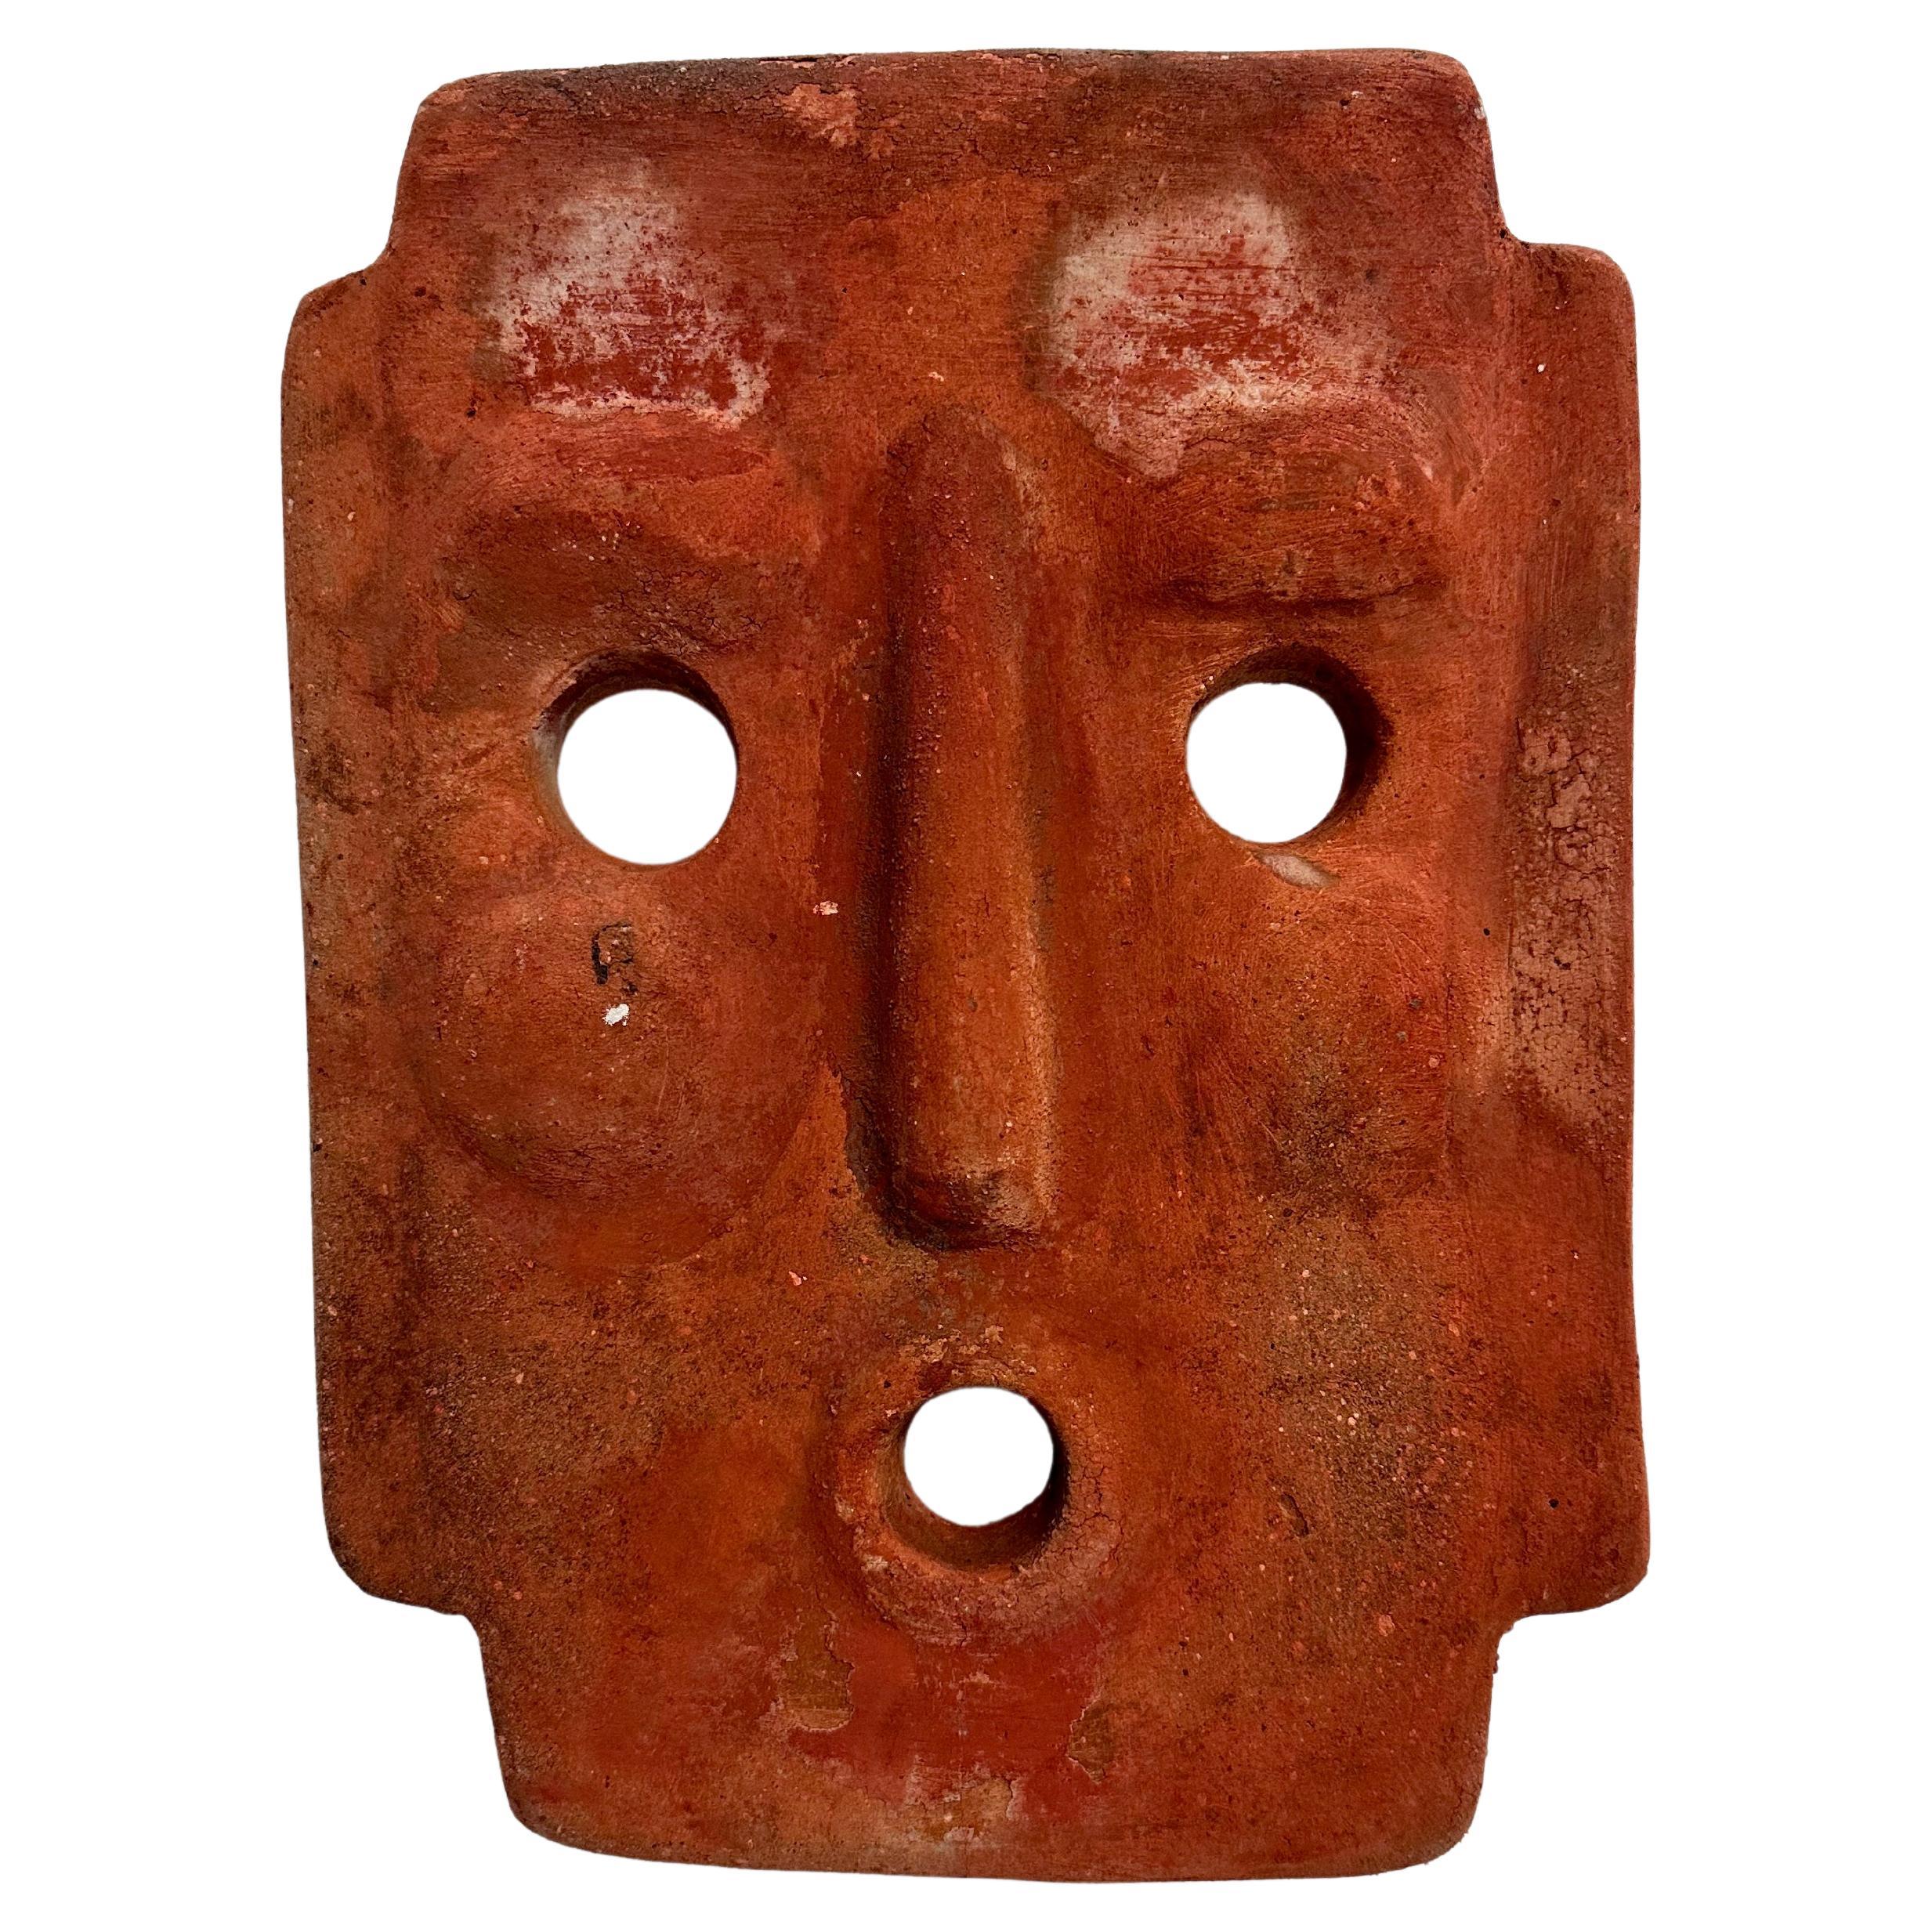 1960s Italian Terracotta Mask Candle Sconce For Sale